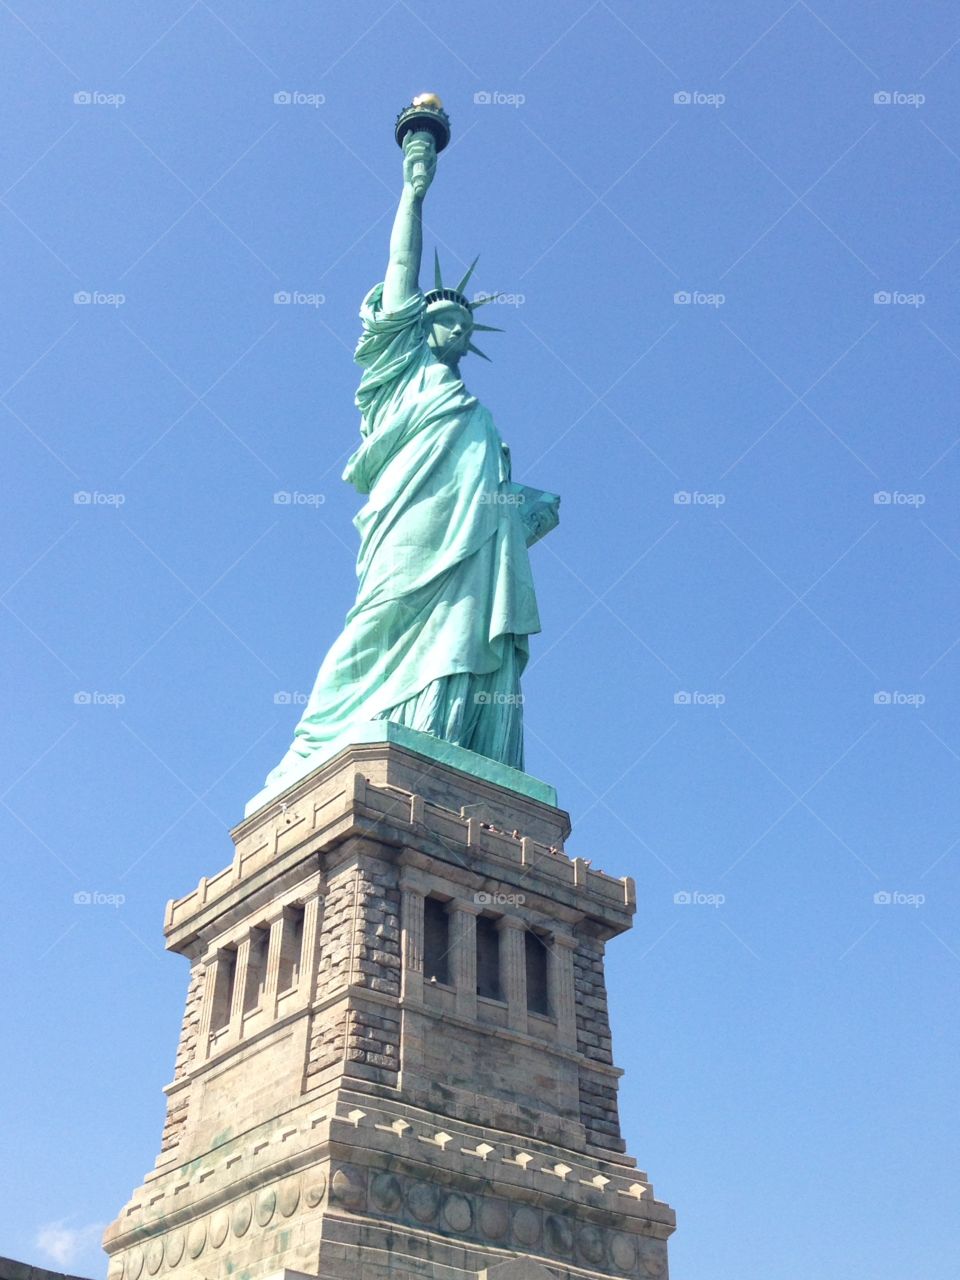 Looking up-on Liberty. Native New Yorkers can sightsee, too!